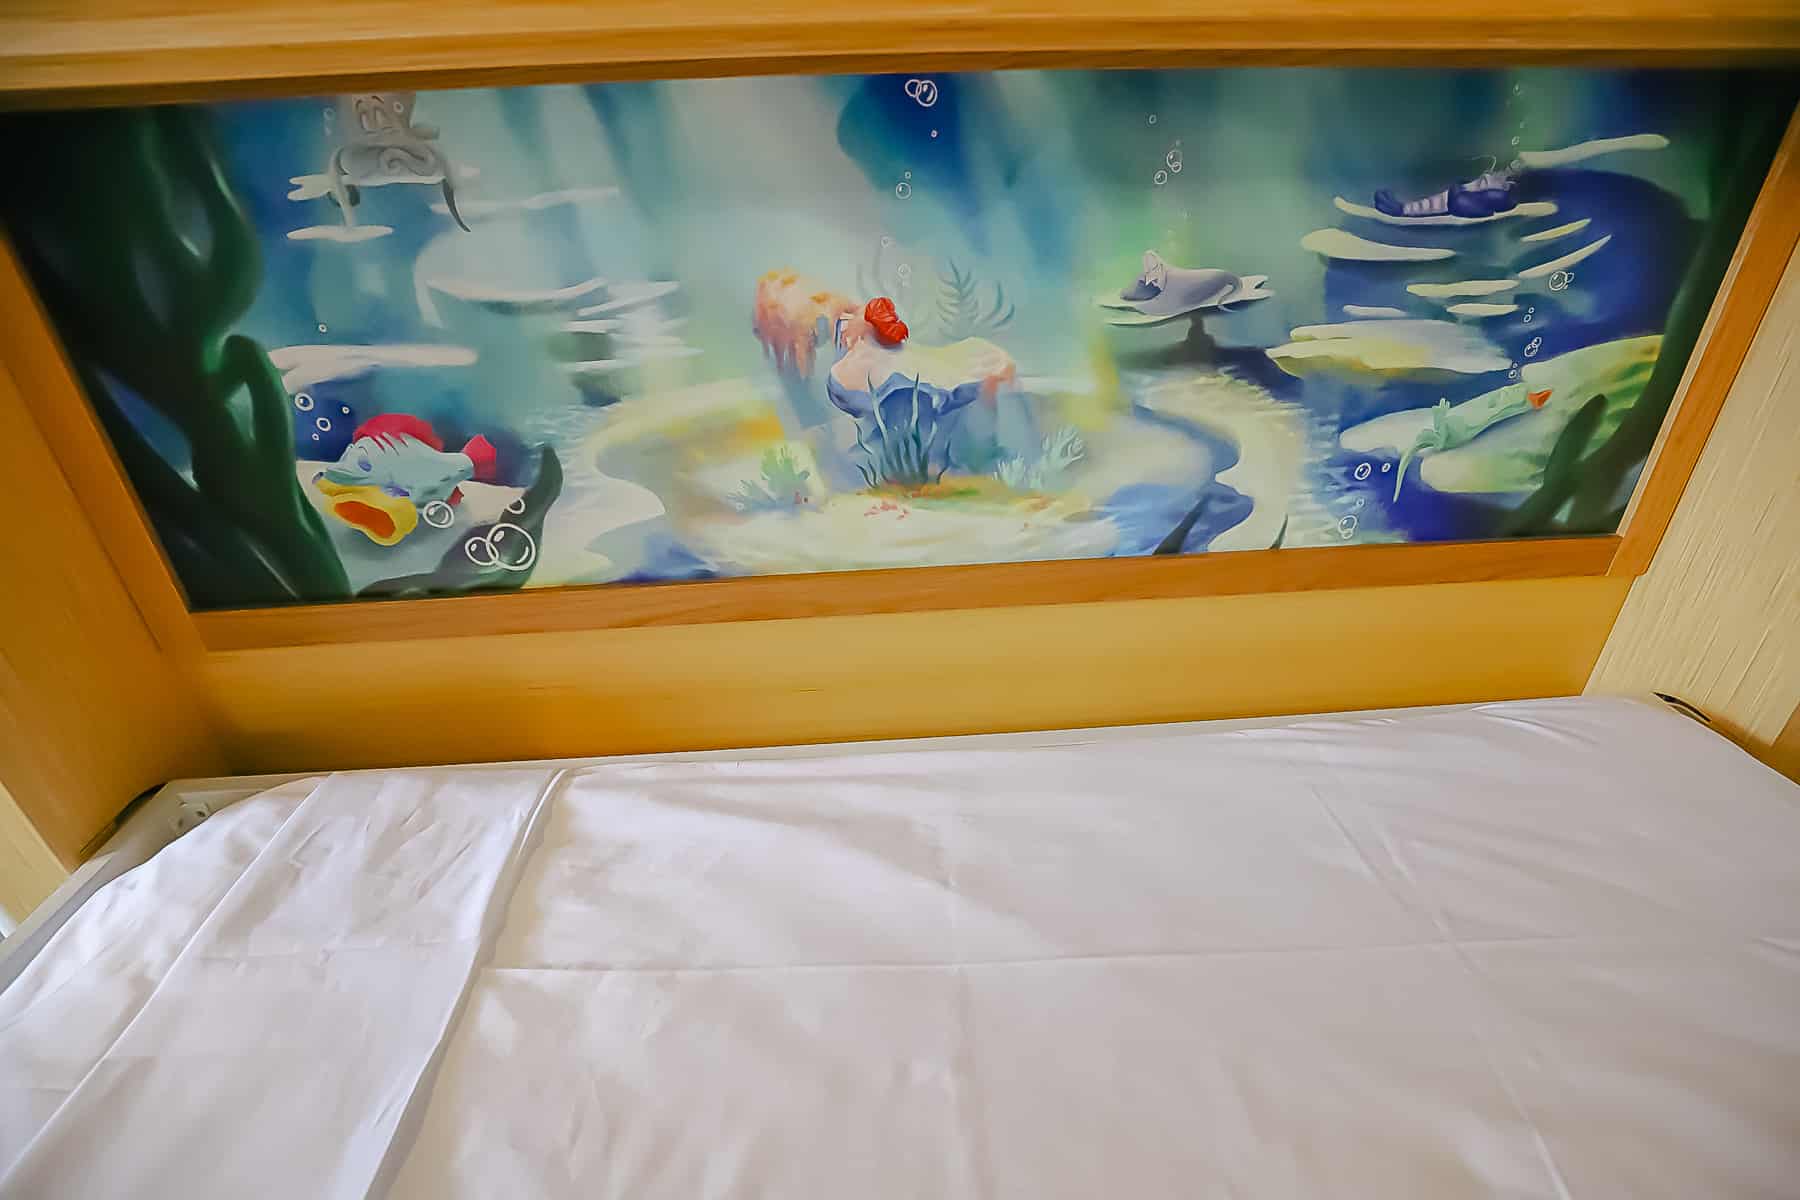 Artwork in the fifth sleeper bed that shows Sebastian from 'The Little Mermaid' sleeping. 